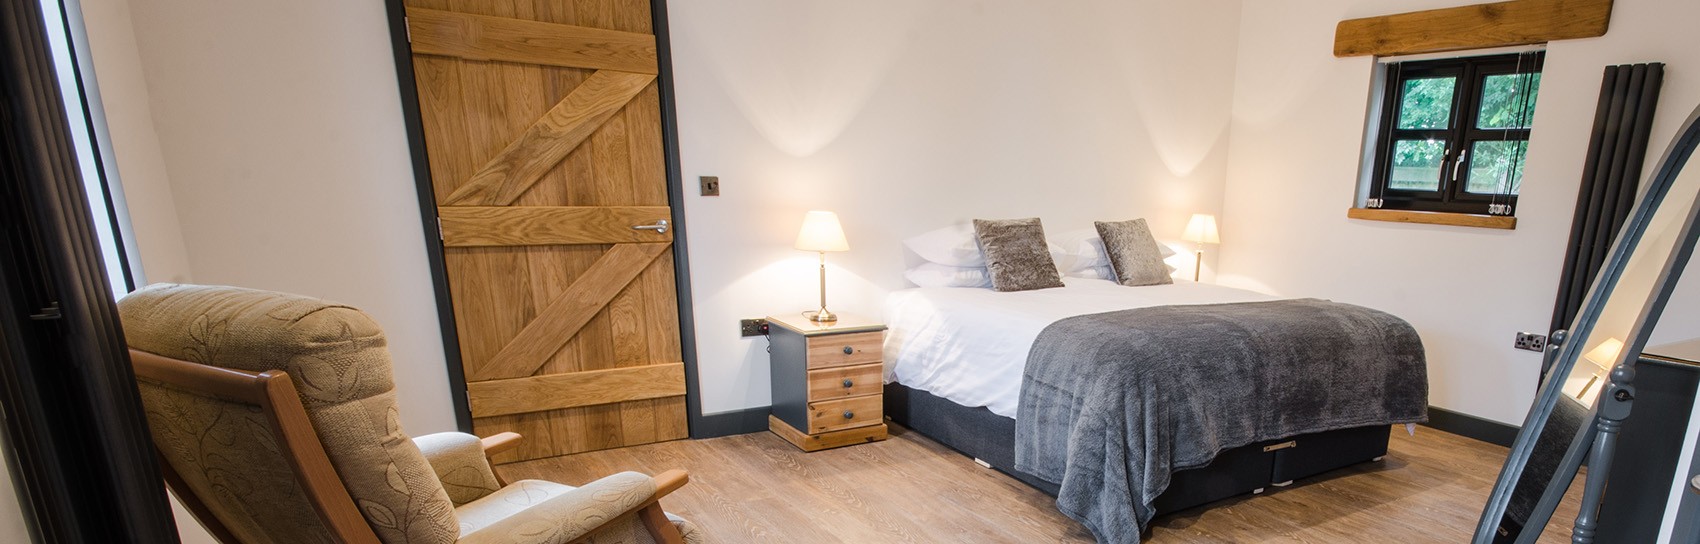 Spacious bedroom at The Stables self catering cottage. Photograph by THE STABLES